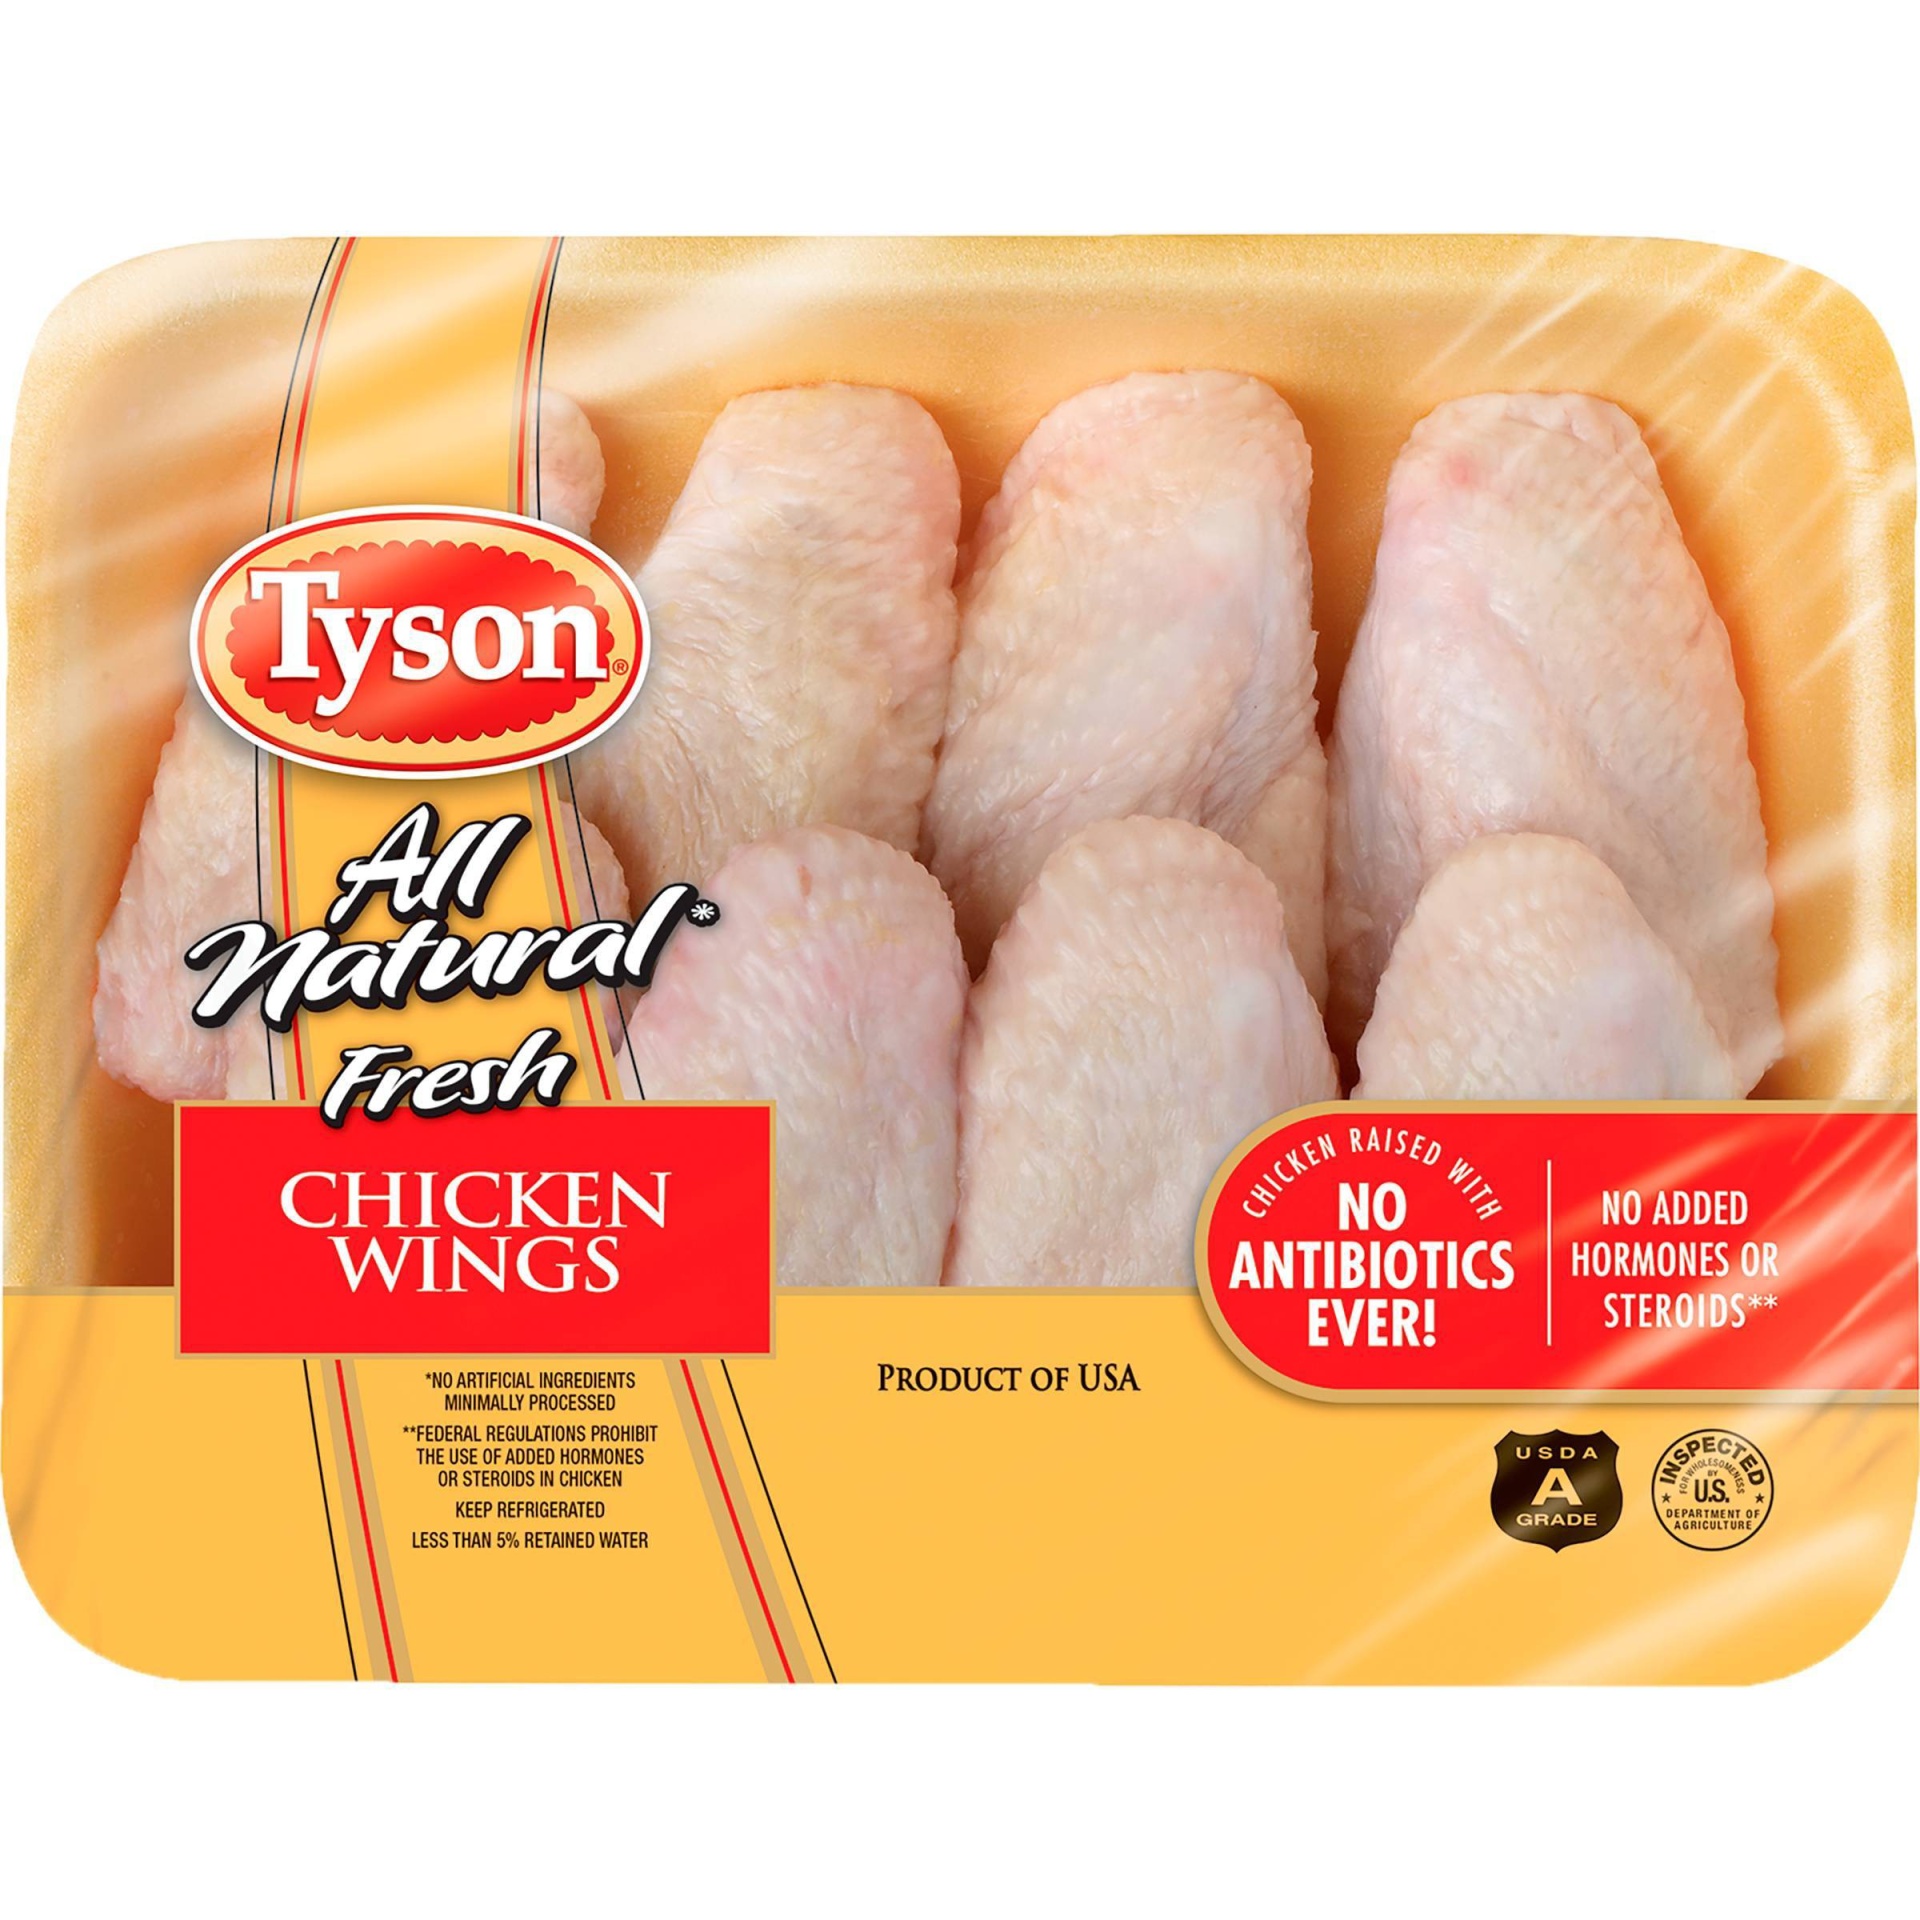 Tyson All Natural Antibiotic Free Chicken Wings 1.482.75 lbs per lb